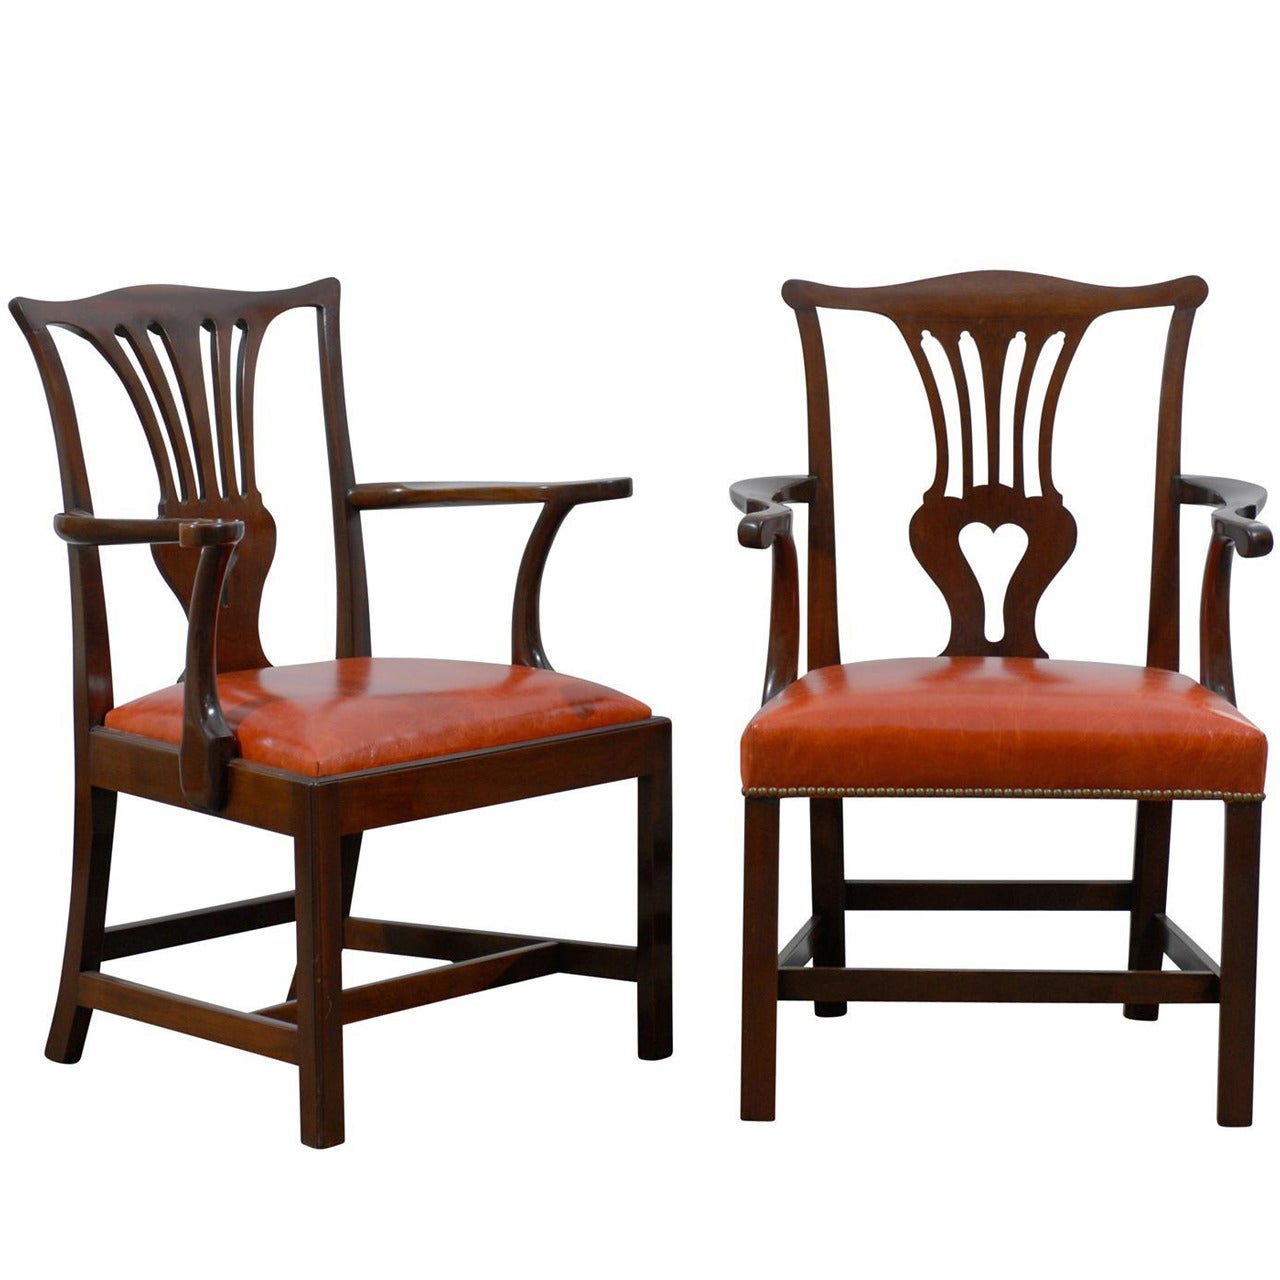 Working Pair of Chippendale Armchairs in Mahogany